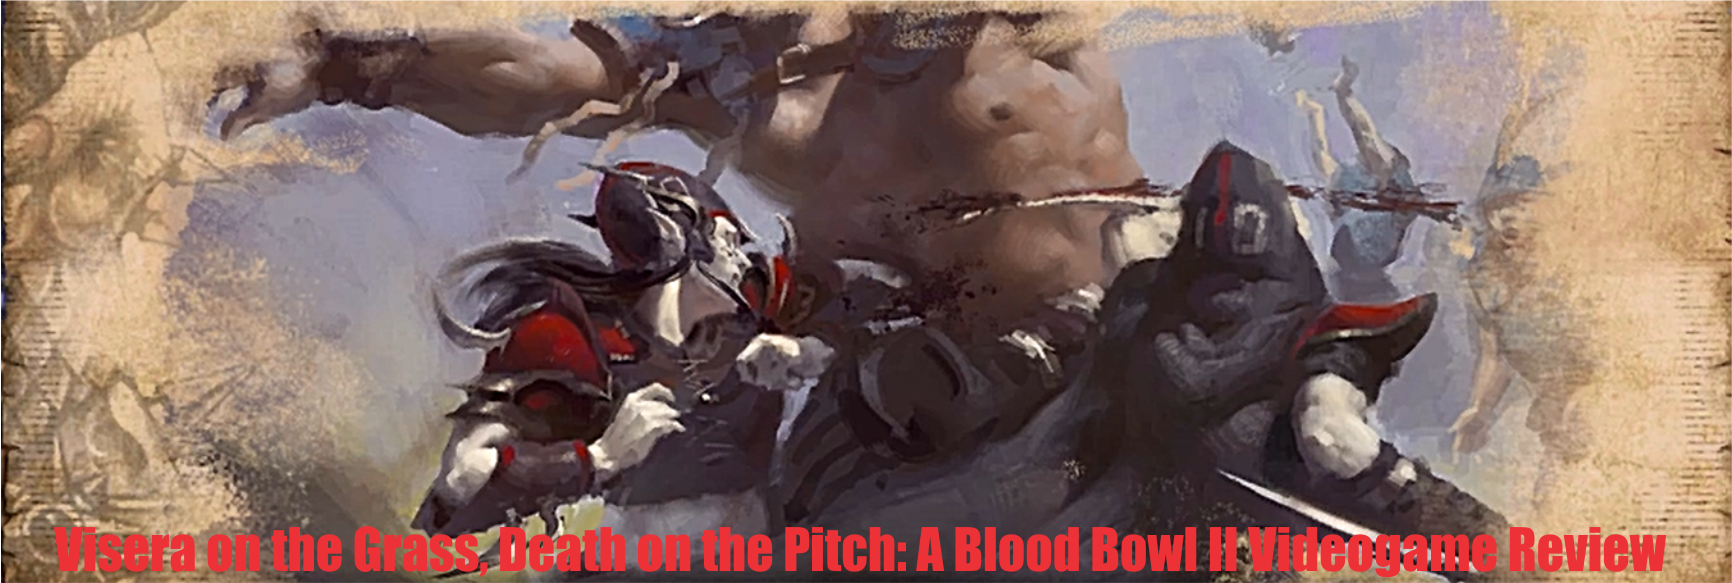 blood bowl II banner.png